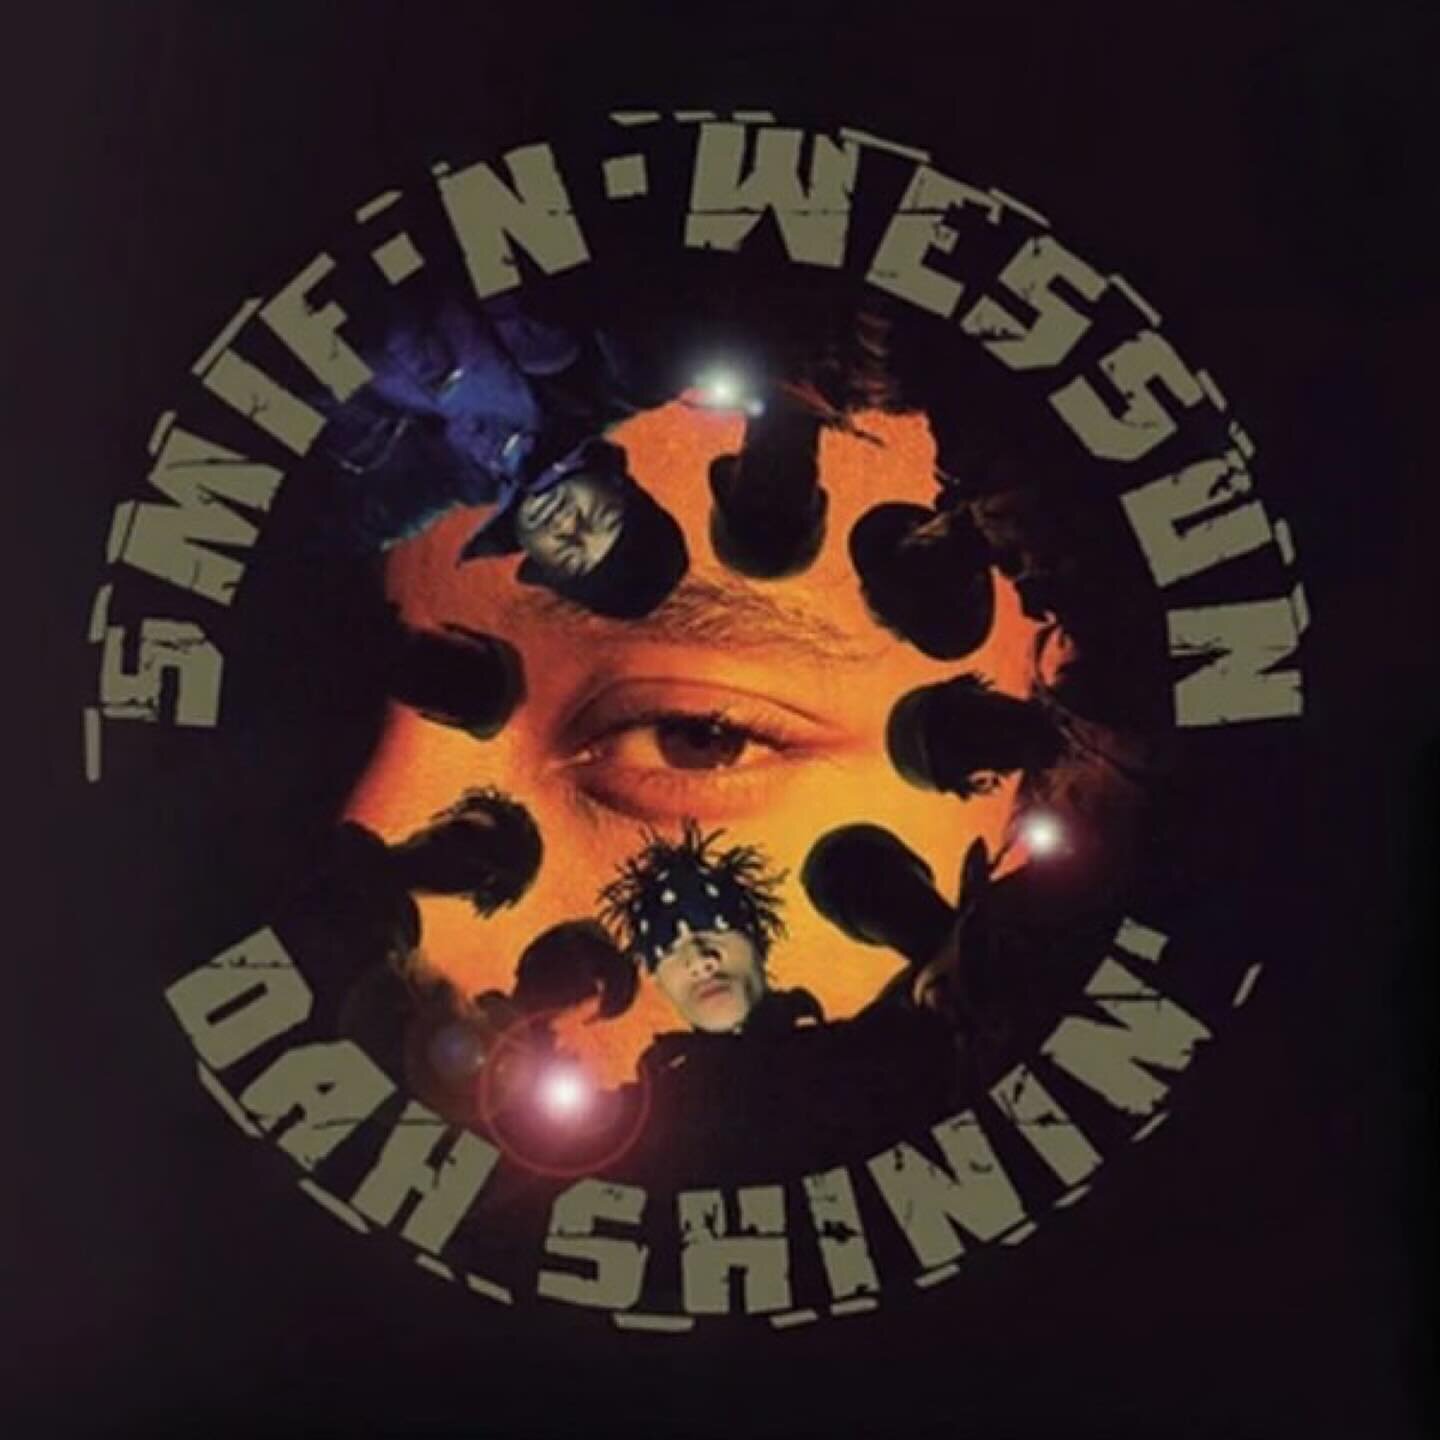 🎂29 years and still standing strong. @realsmifnwessun&rsquo;s #DahShinin 

The album produced by Da Beatminerz has gone on to sell over 300,000 copies in the United States, and includes the single &quot;Bucktown&quot;. In 1998, the album was selecte